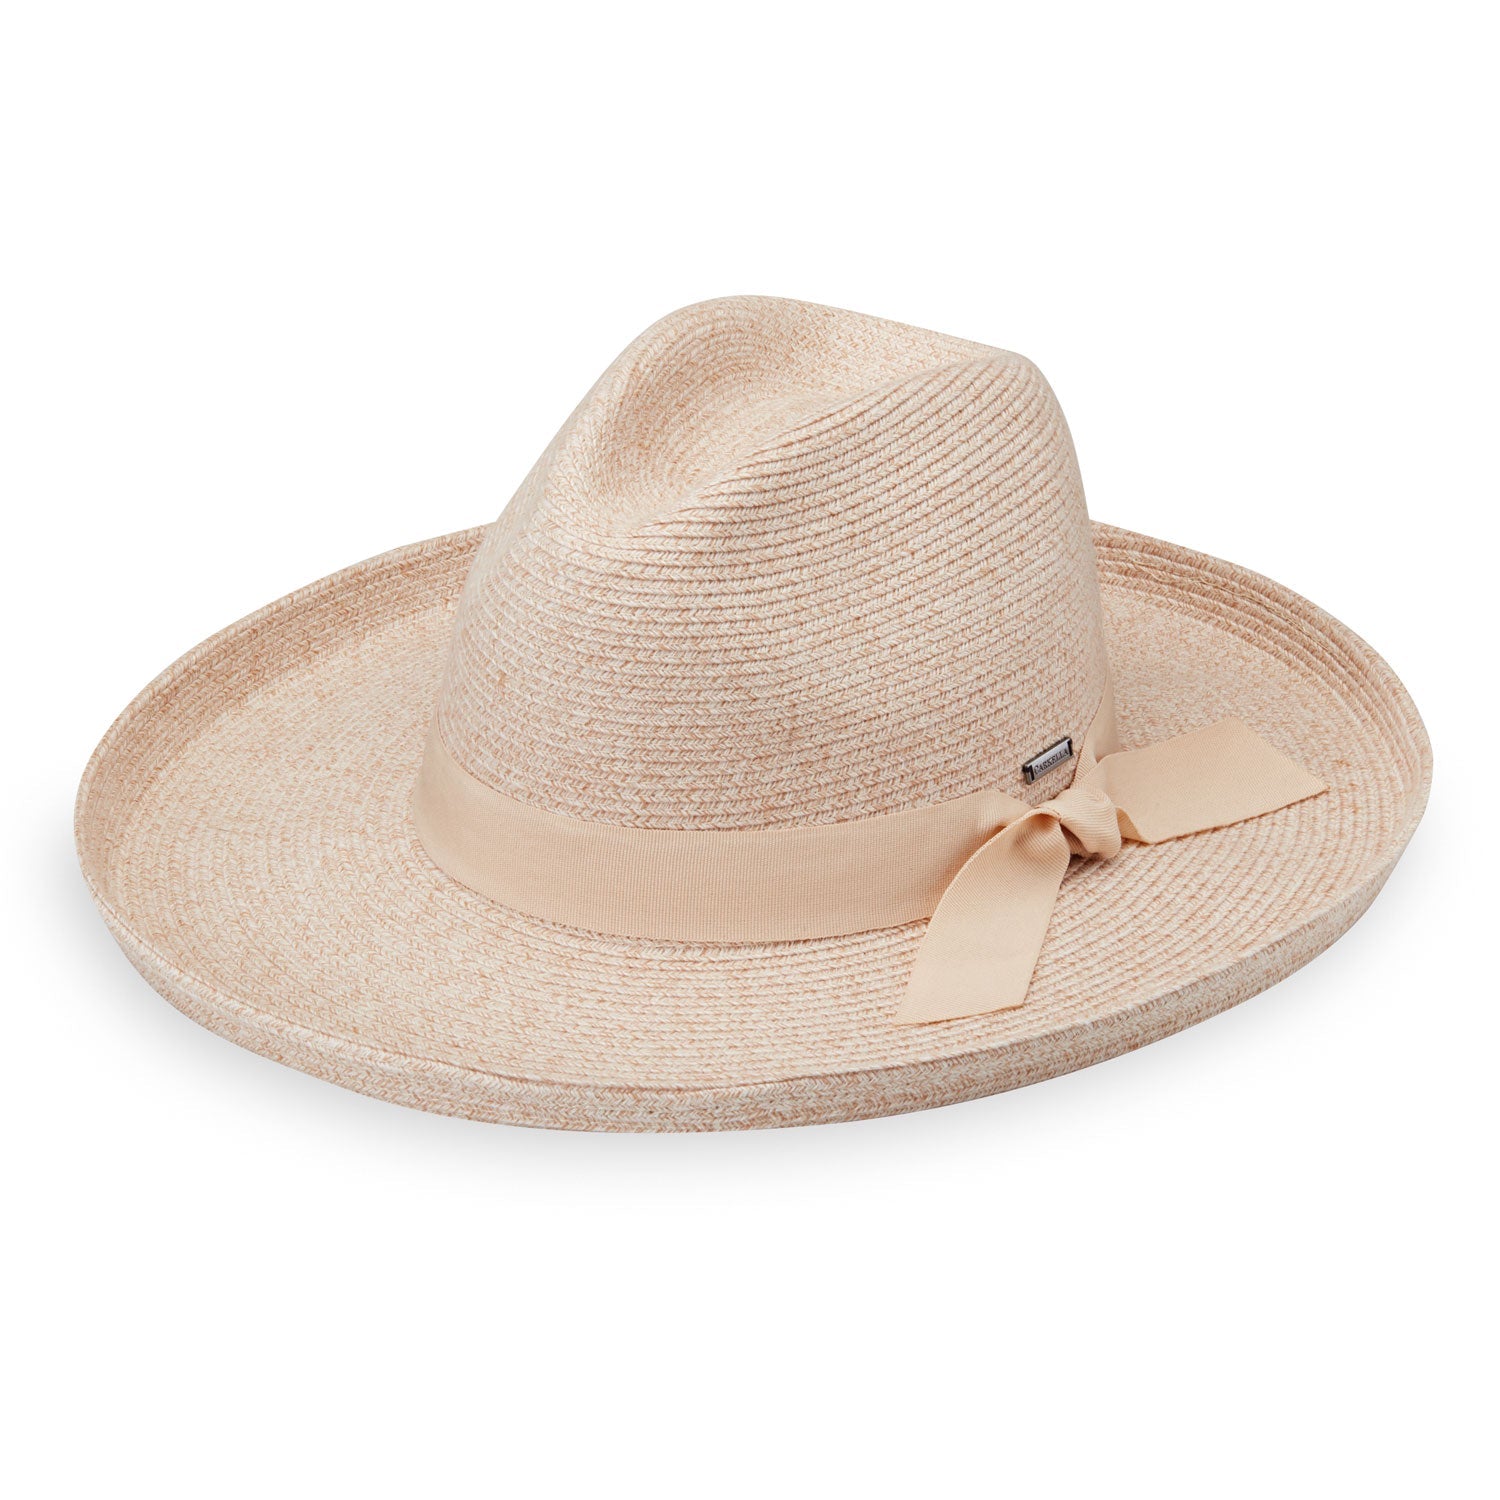 Featuring Front of Wide Brim Fedora Style Vivian UPF Sun Hat in White Beige from Carkella by Wallaroo